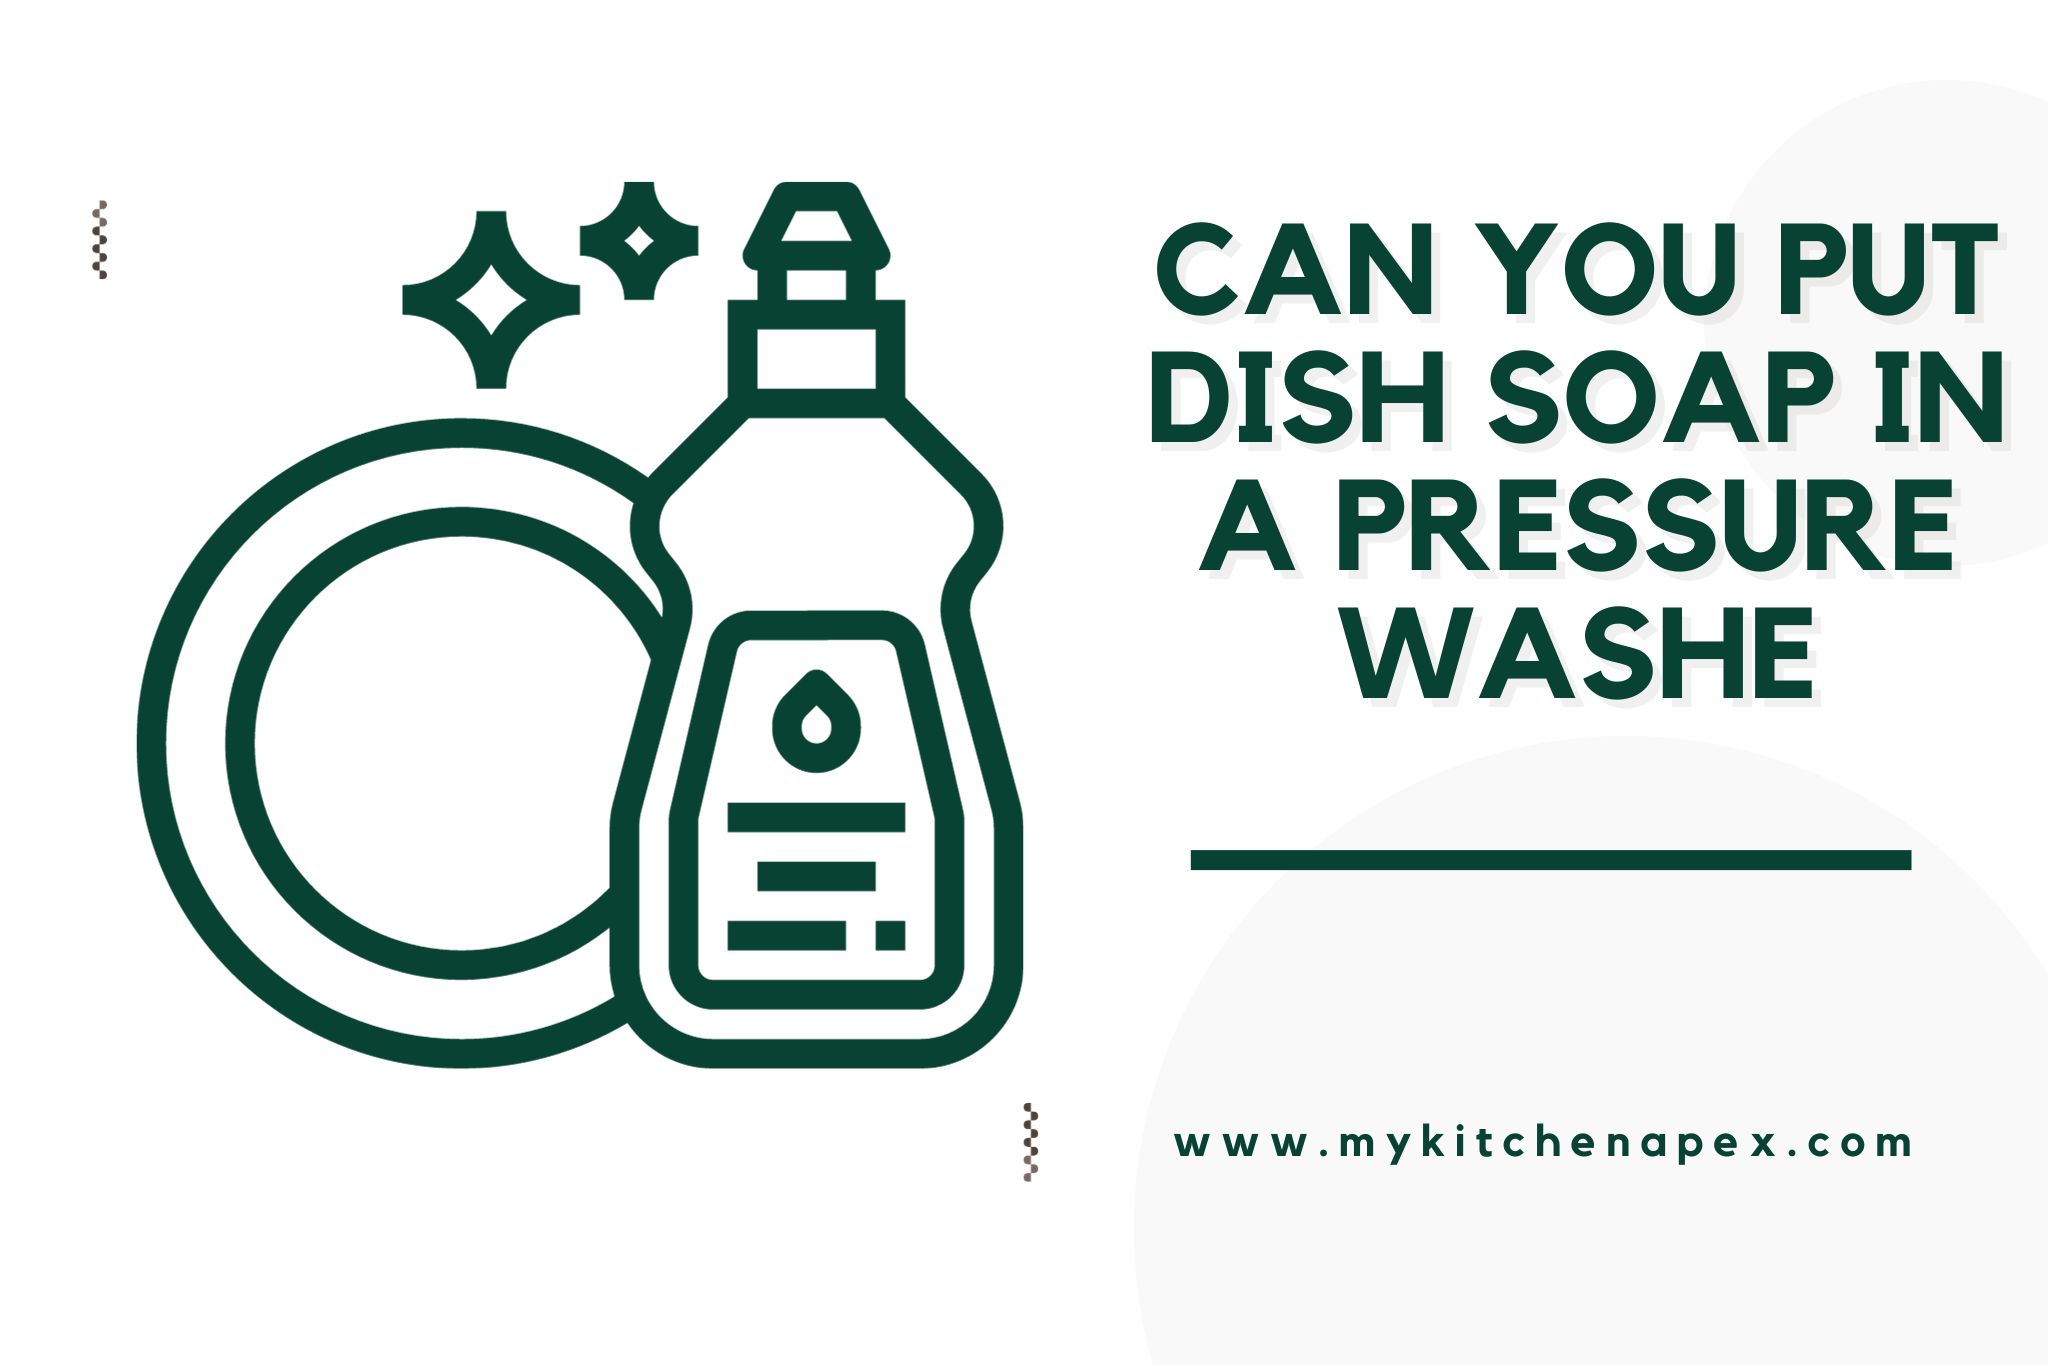 can you put dish soap in a pressure washe